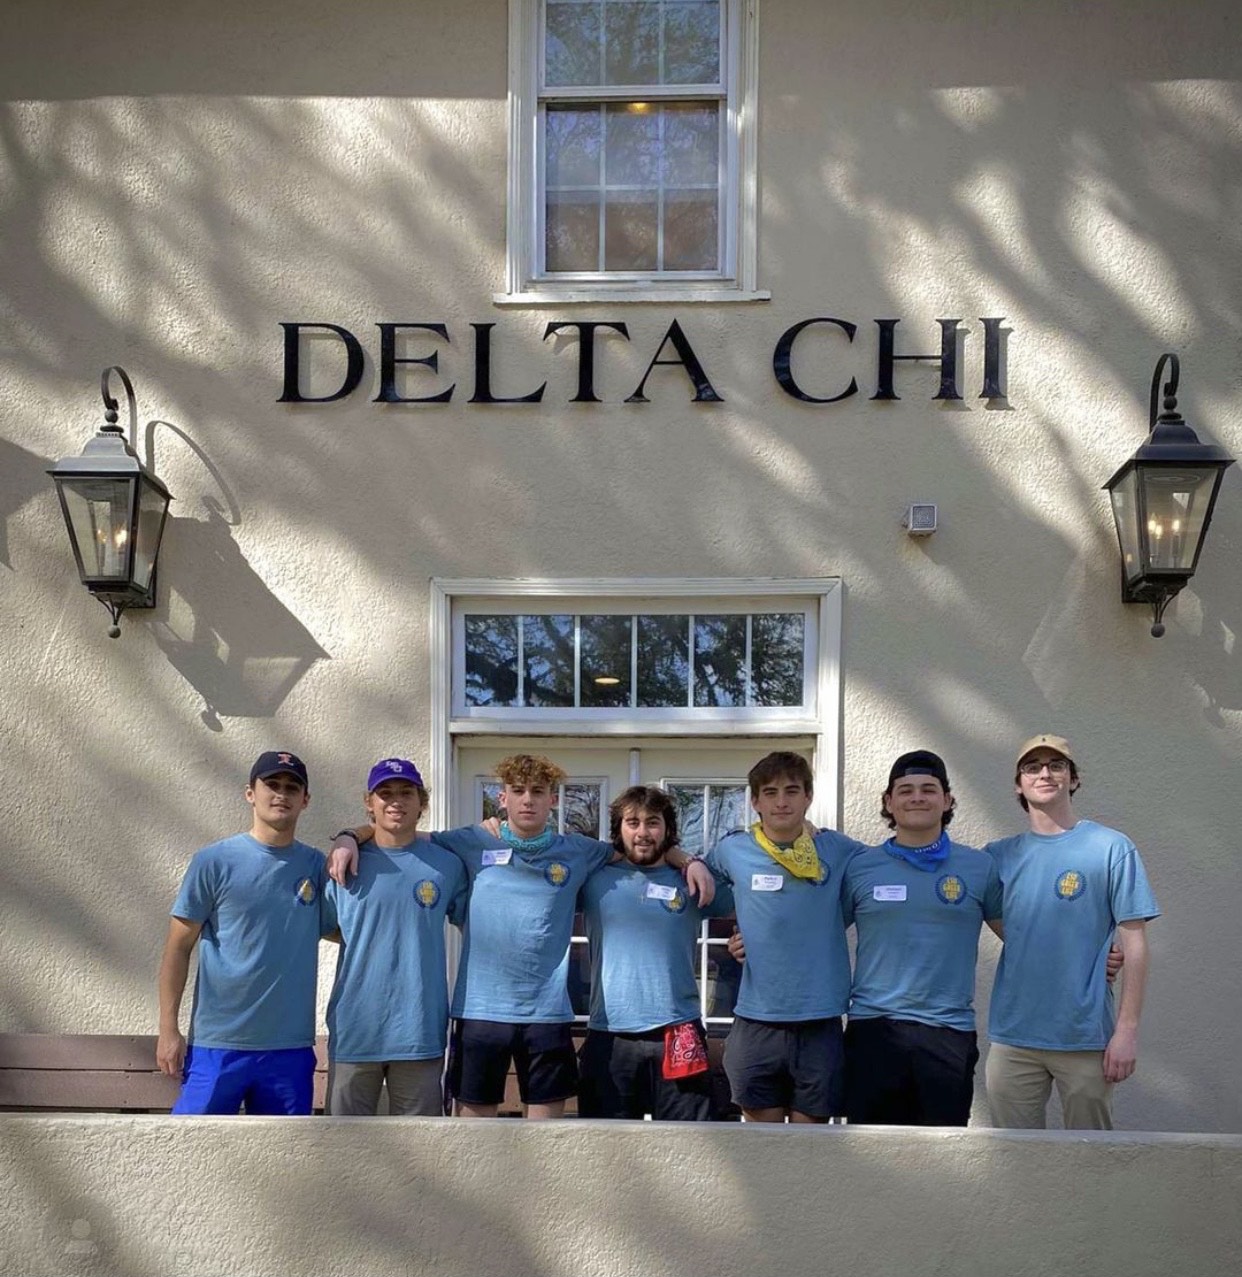 delta chi members in front of house